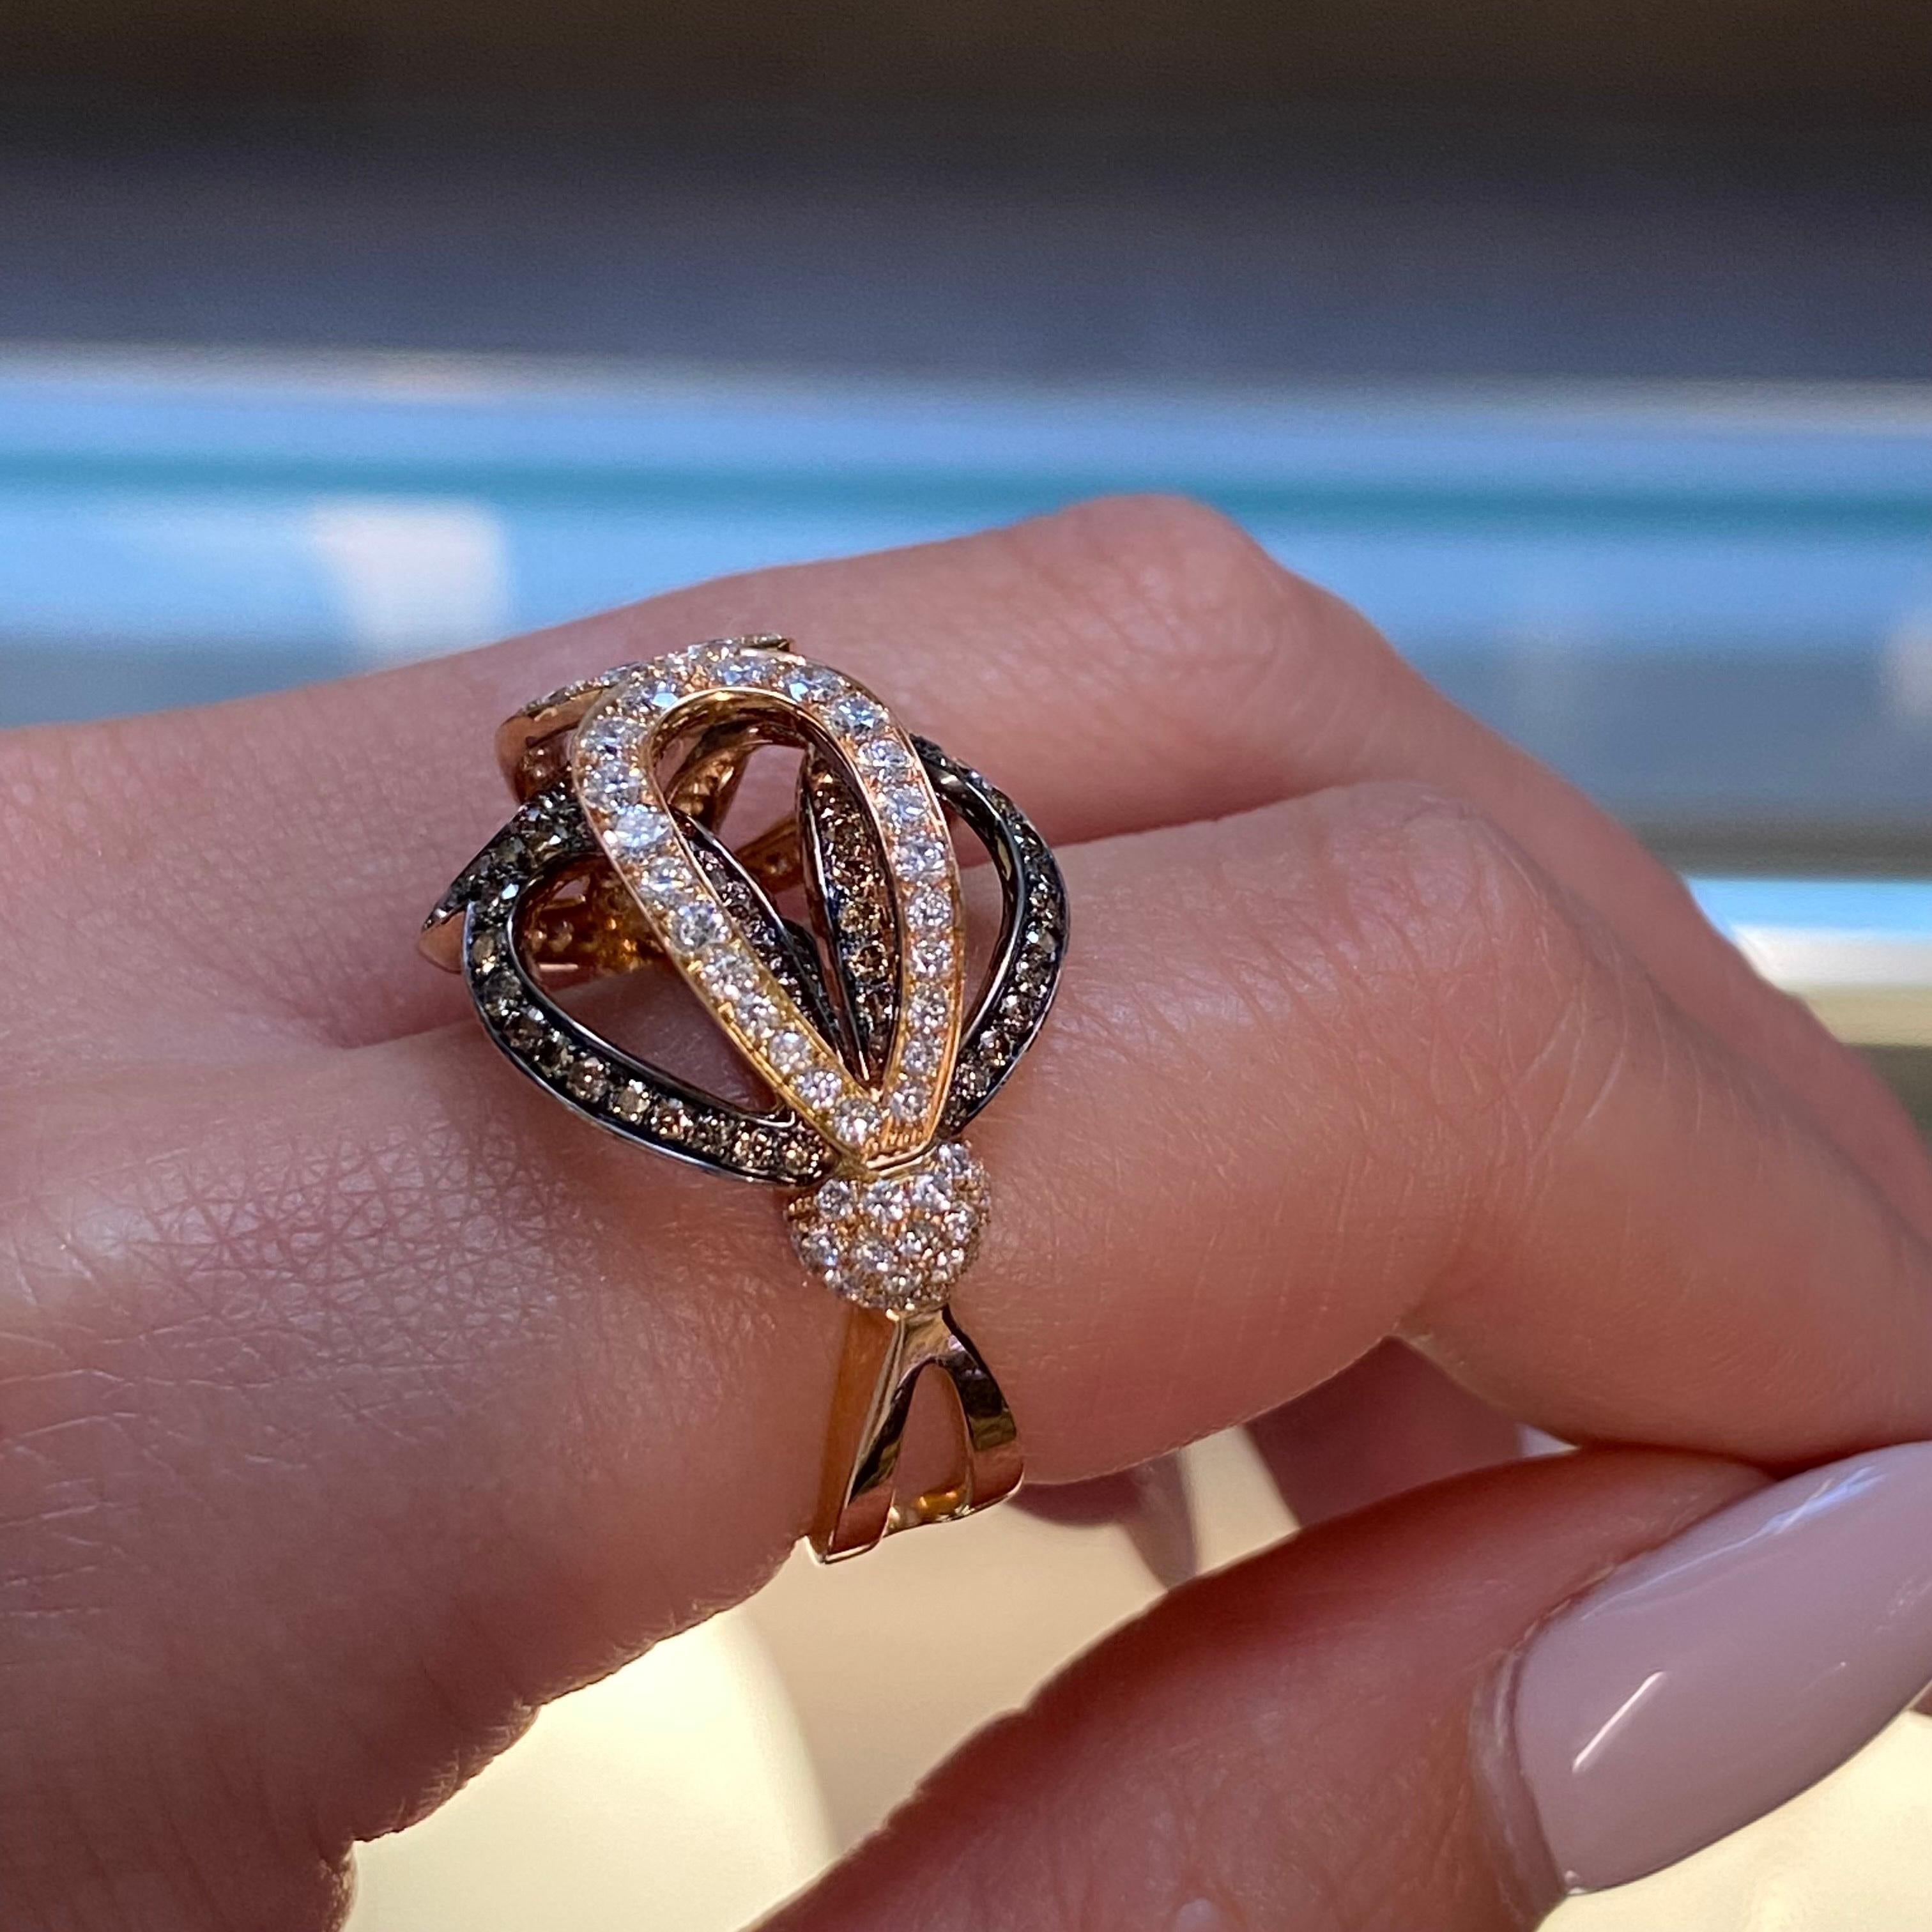 Round Cut Luca Carati White & Brown Diamond Ring 18K Yellow Gold 2.89Cttw For Sale